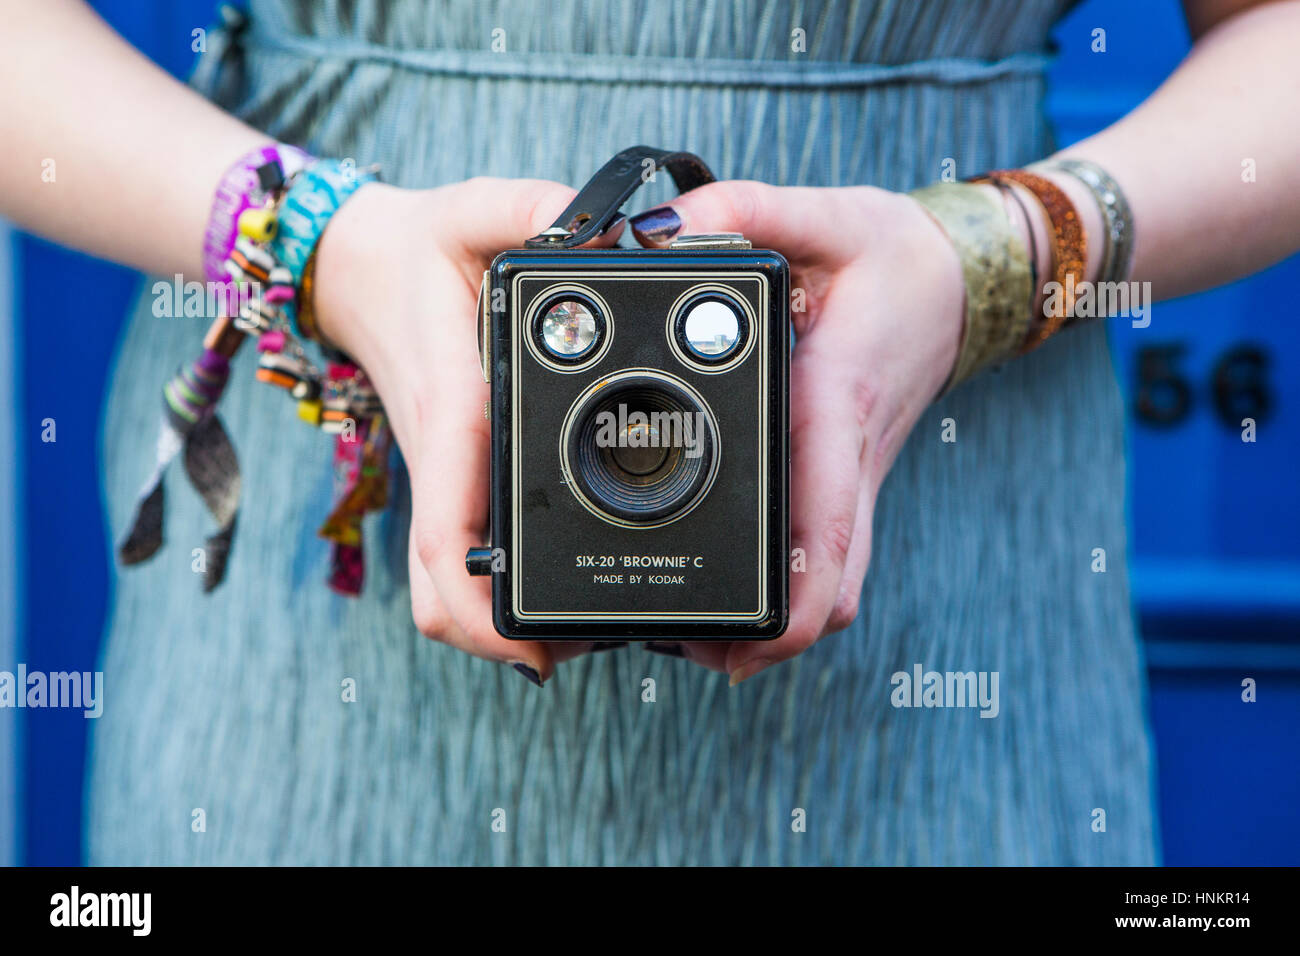 Kodak box brownie camera for film photography, held by caucasion woman with festival wristbands. Stock Photo